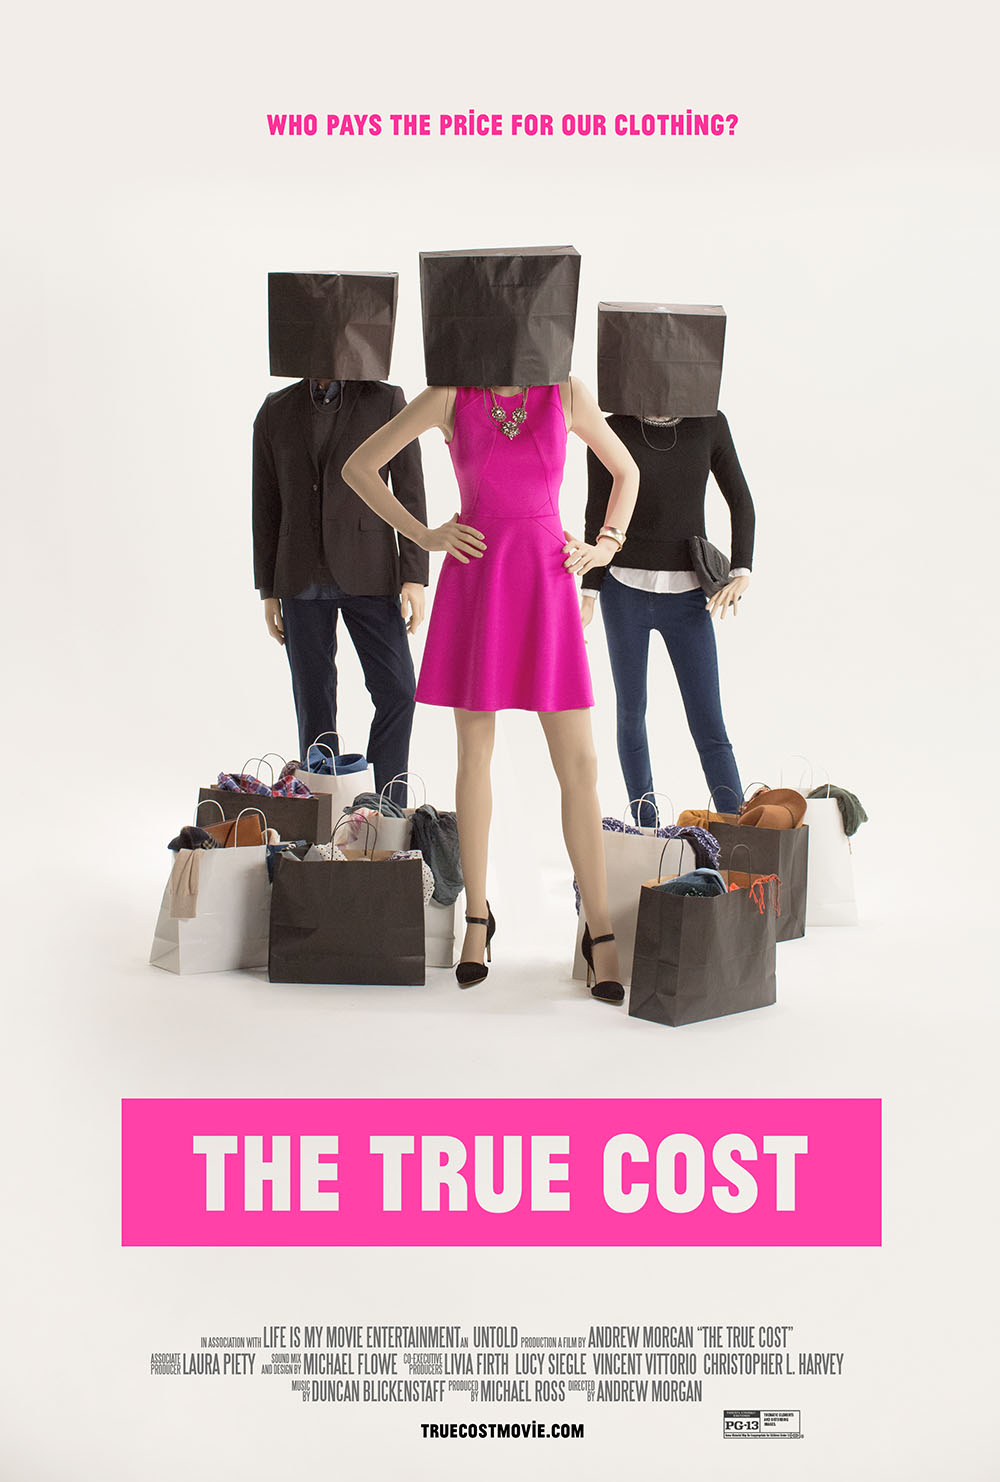 The True Cost movie poster.